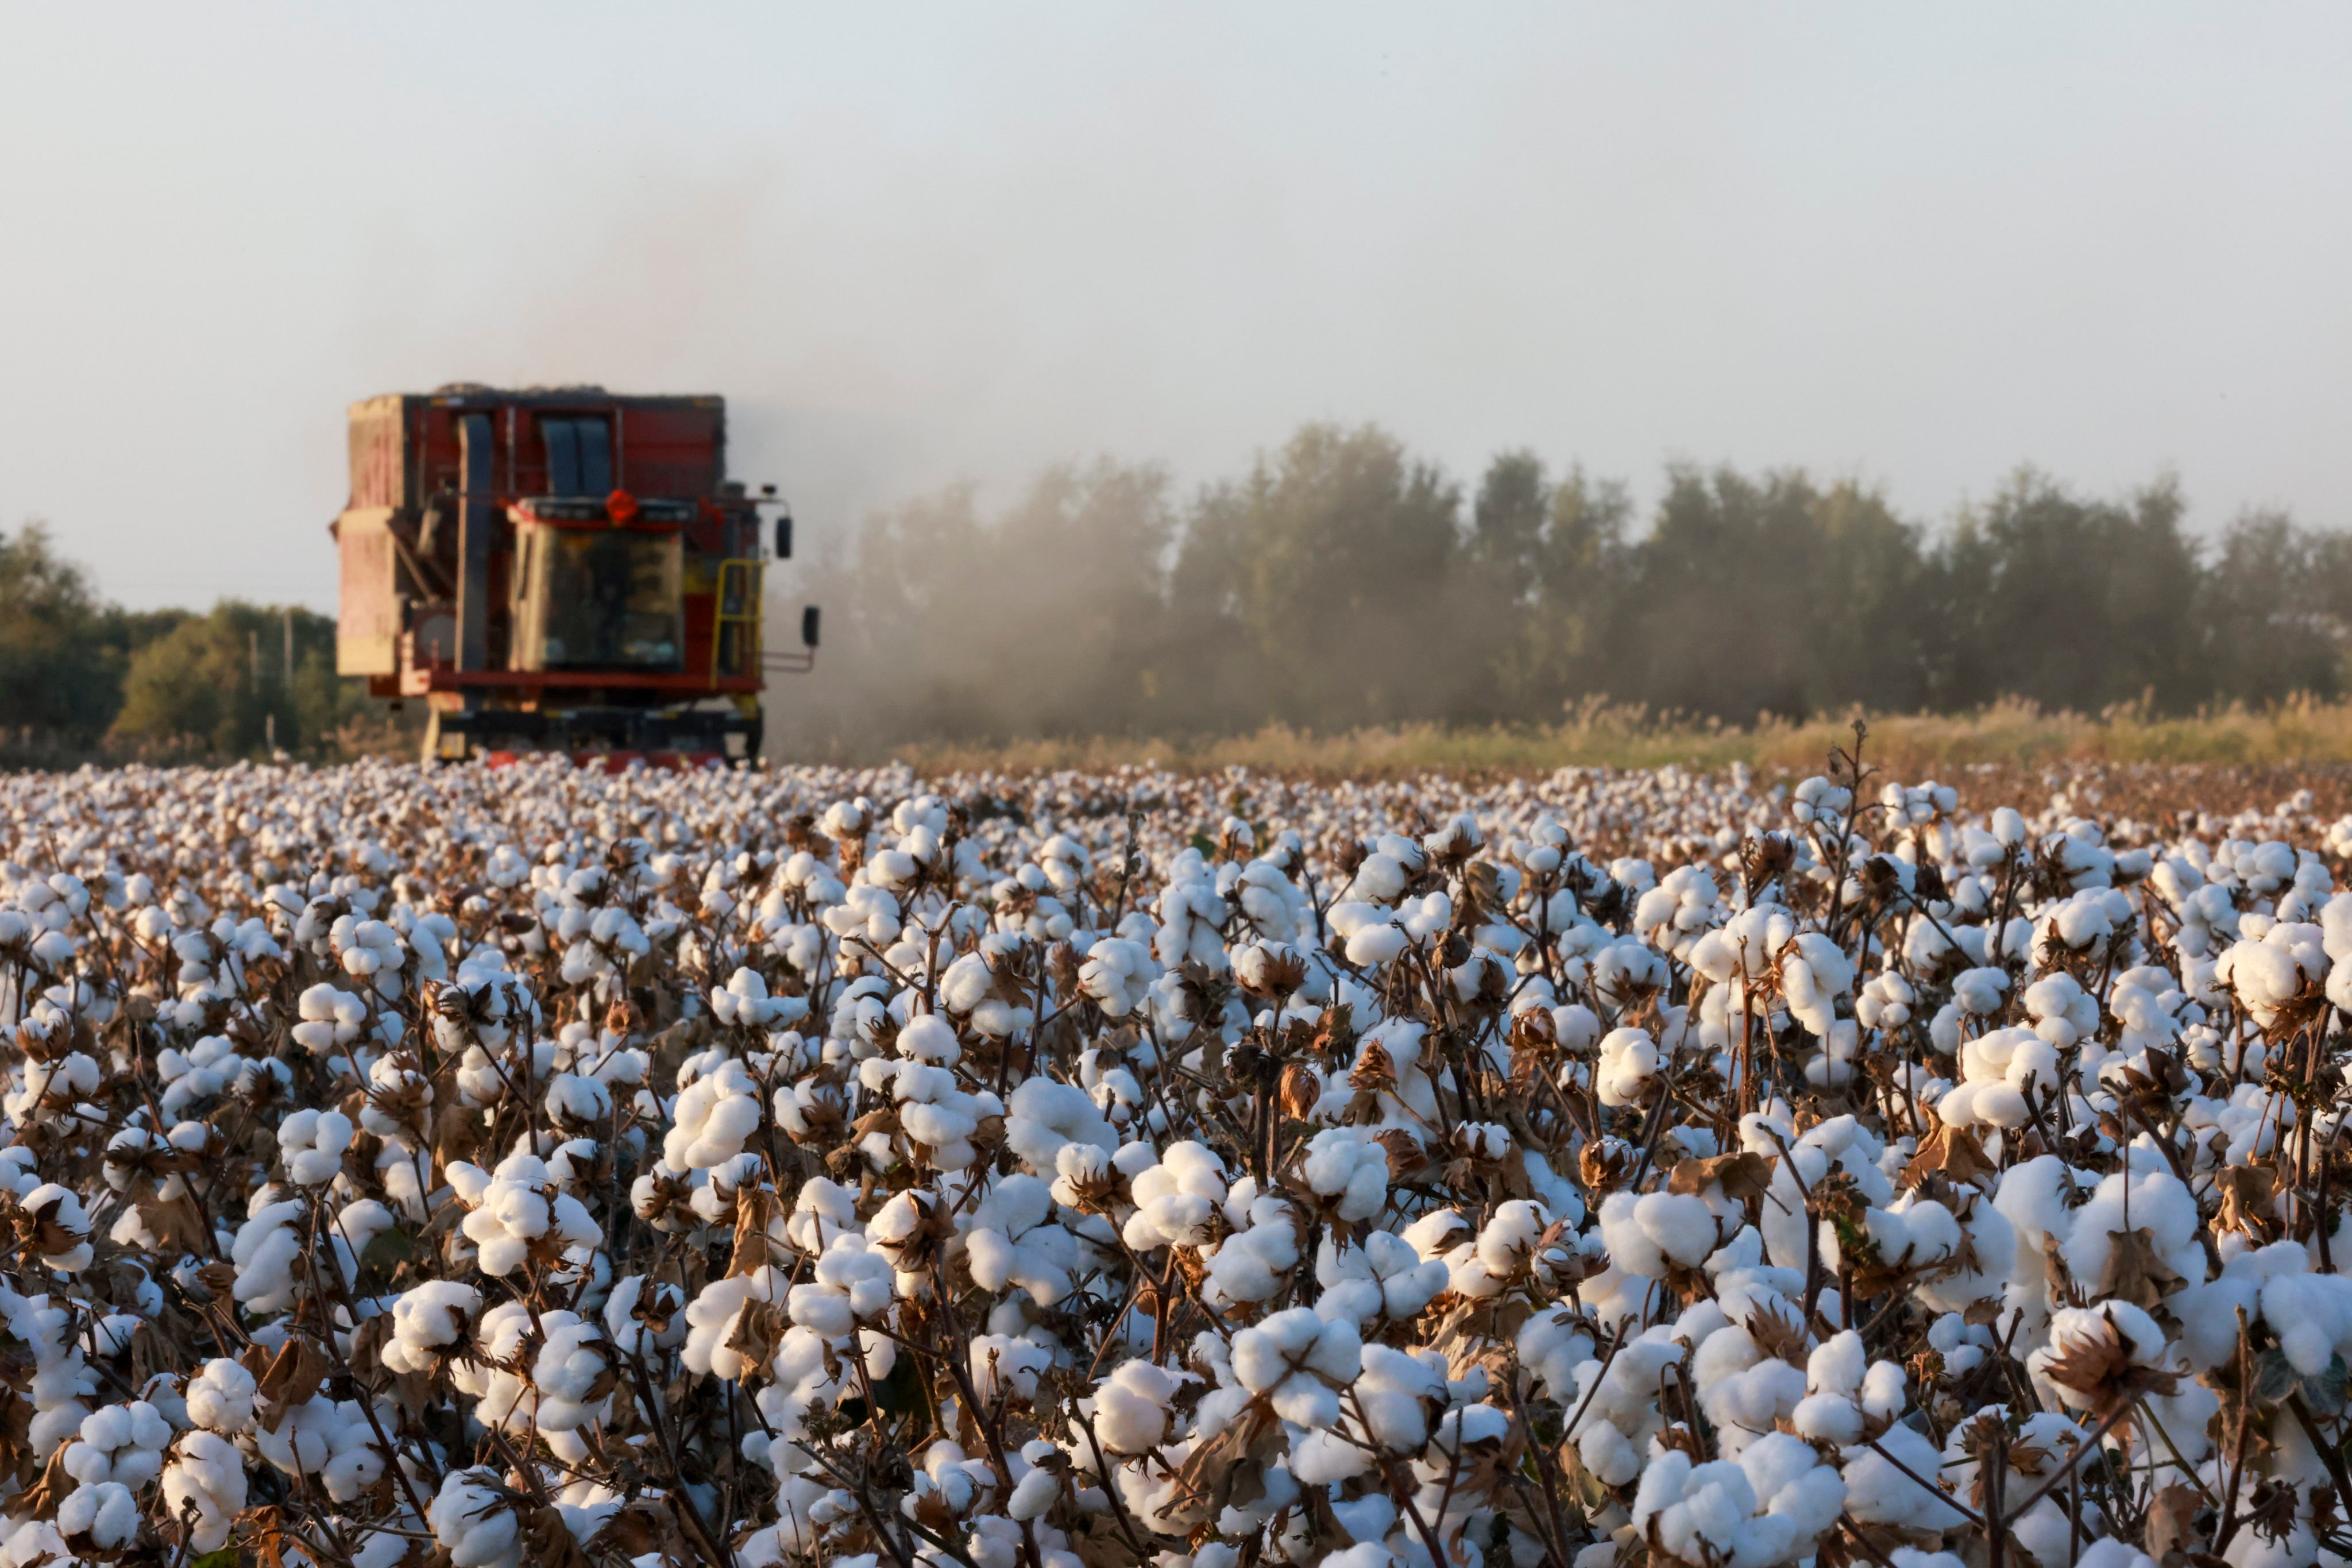 A cotton picker vehicle is seen at work in Xinjiang in September 2022. Photo: Xinhua